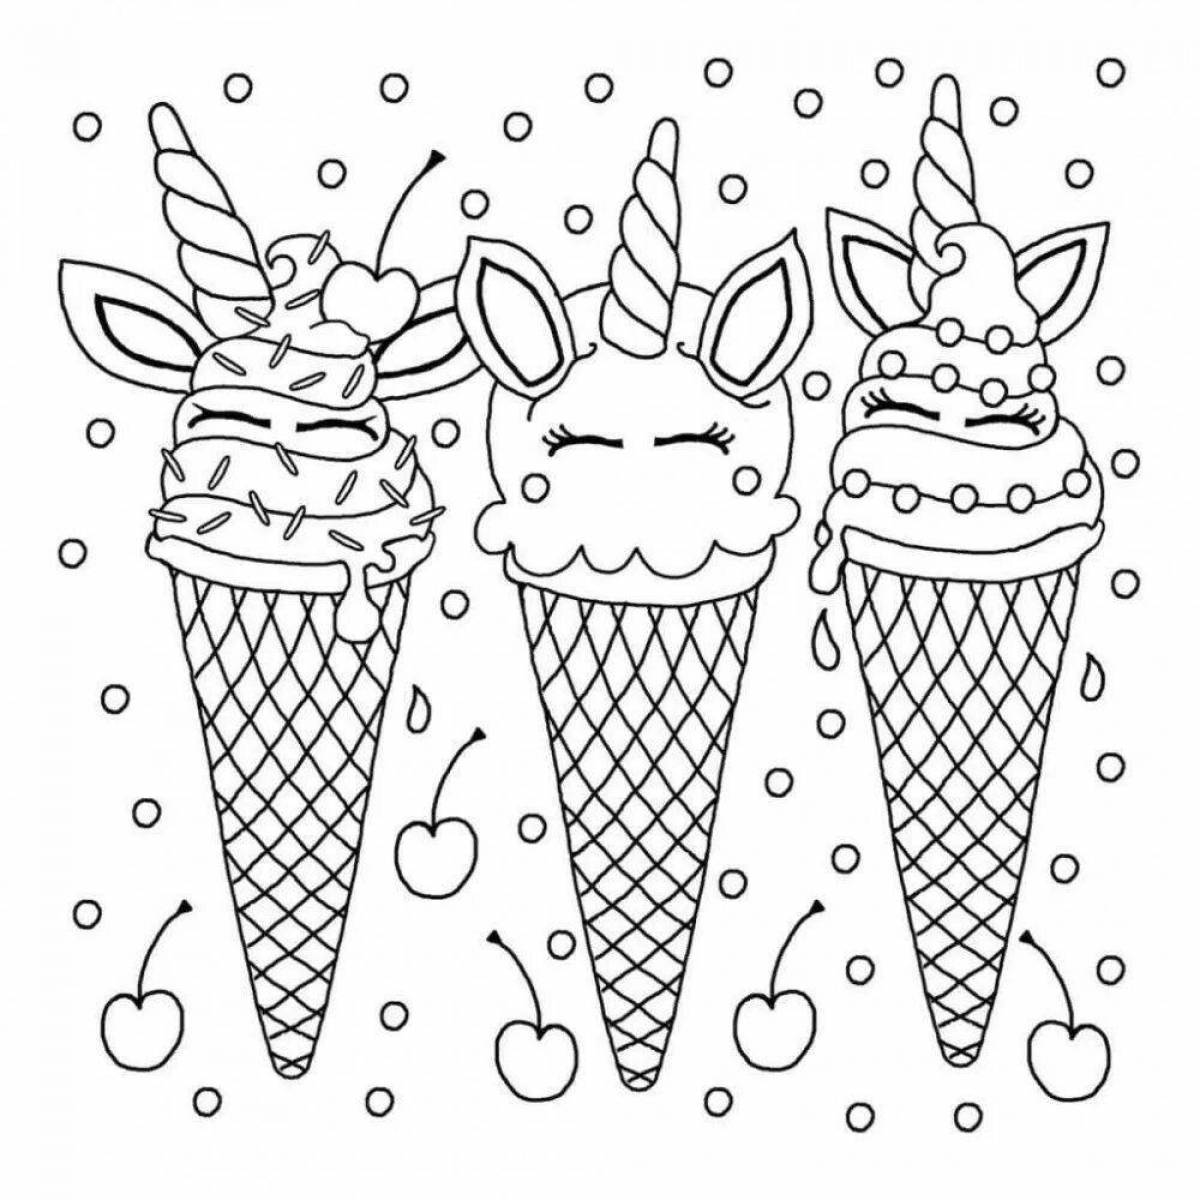 Coloring page playful cat with ice cream